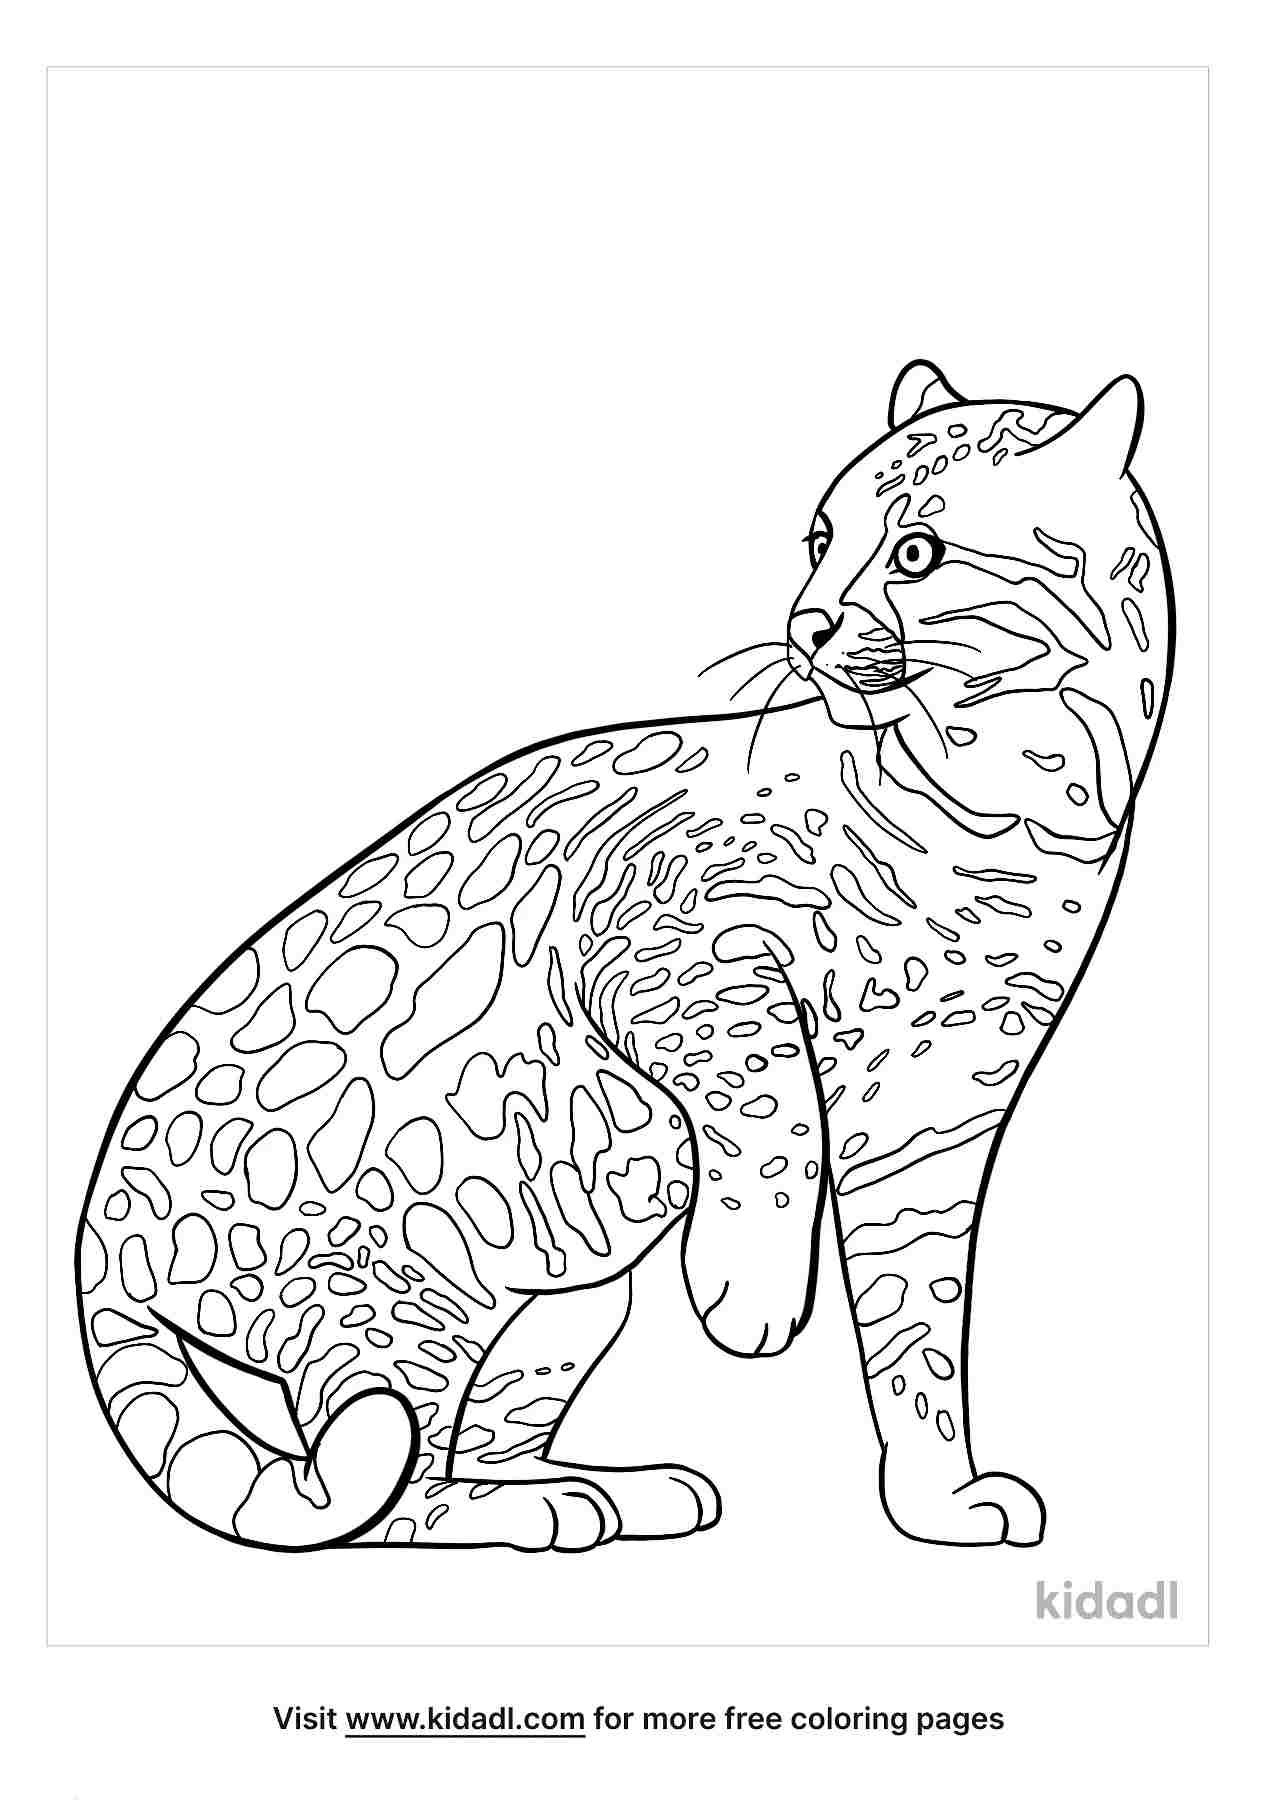 Free ocelot coloring page coloring page printables